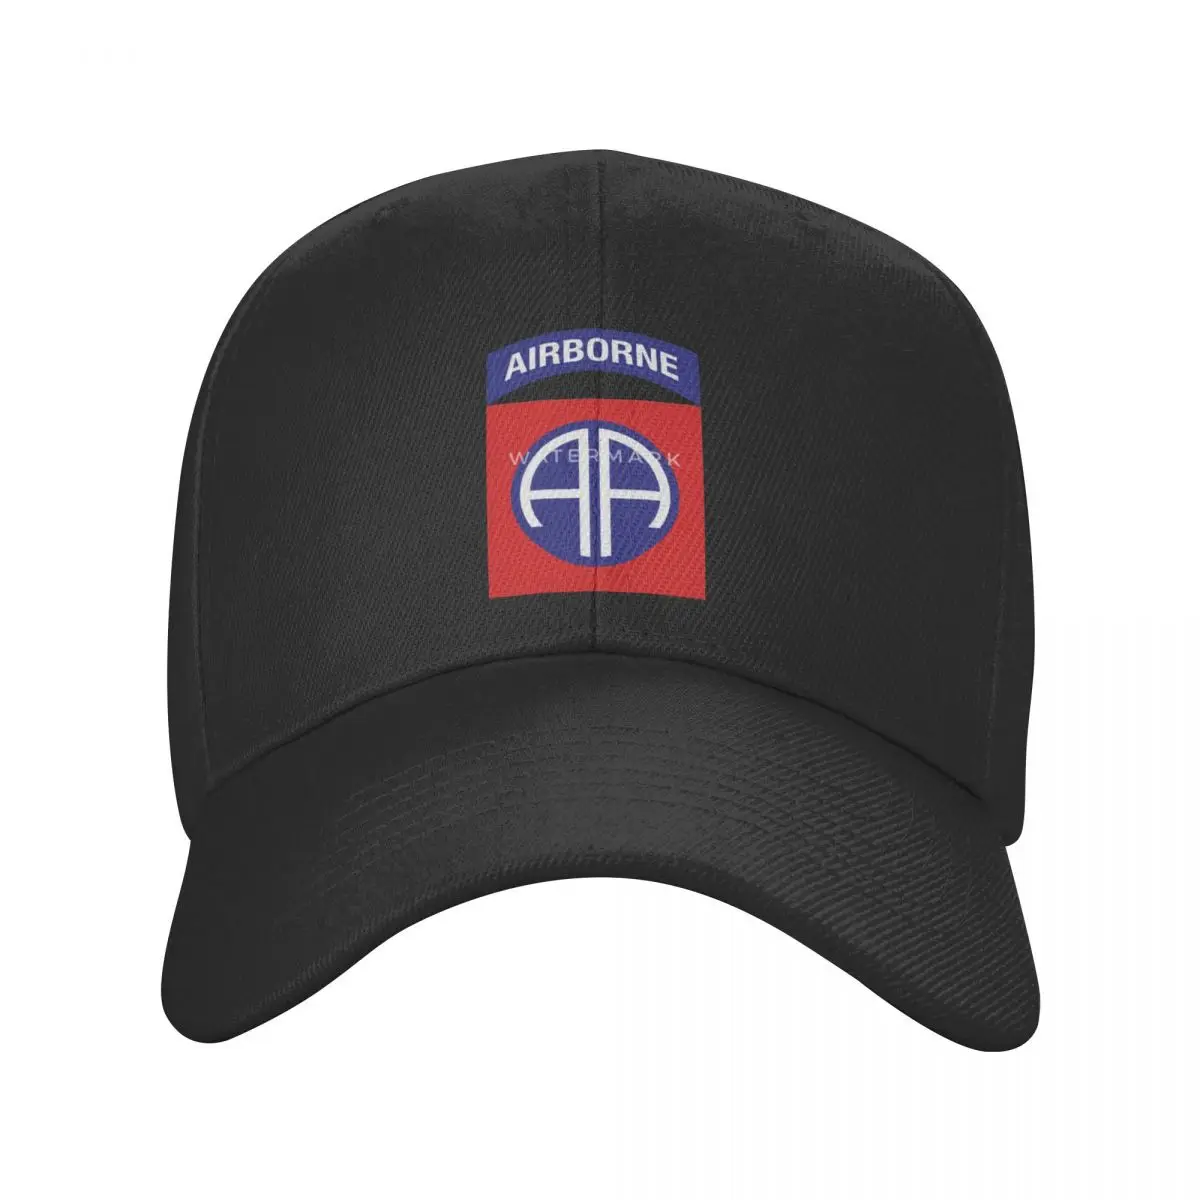 

82nd Airborne Division Casquette, Polyester Cap Trendy Hat Wicking Sports Nice Gift